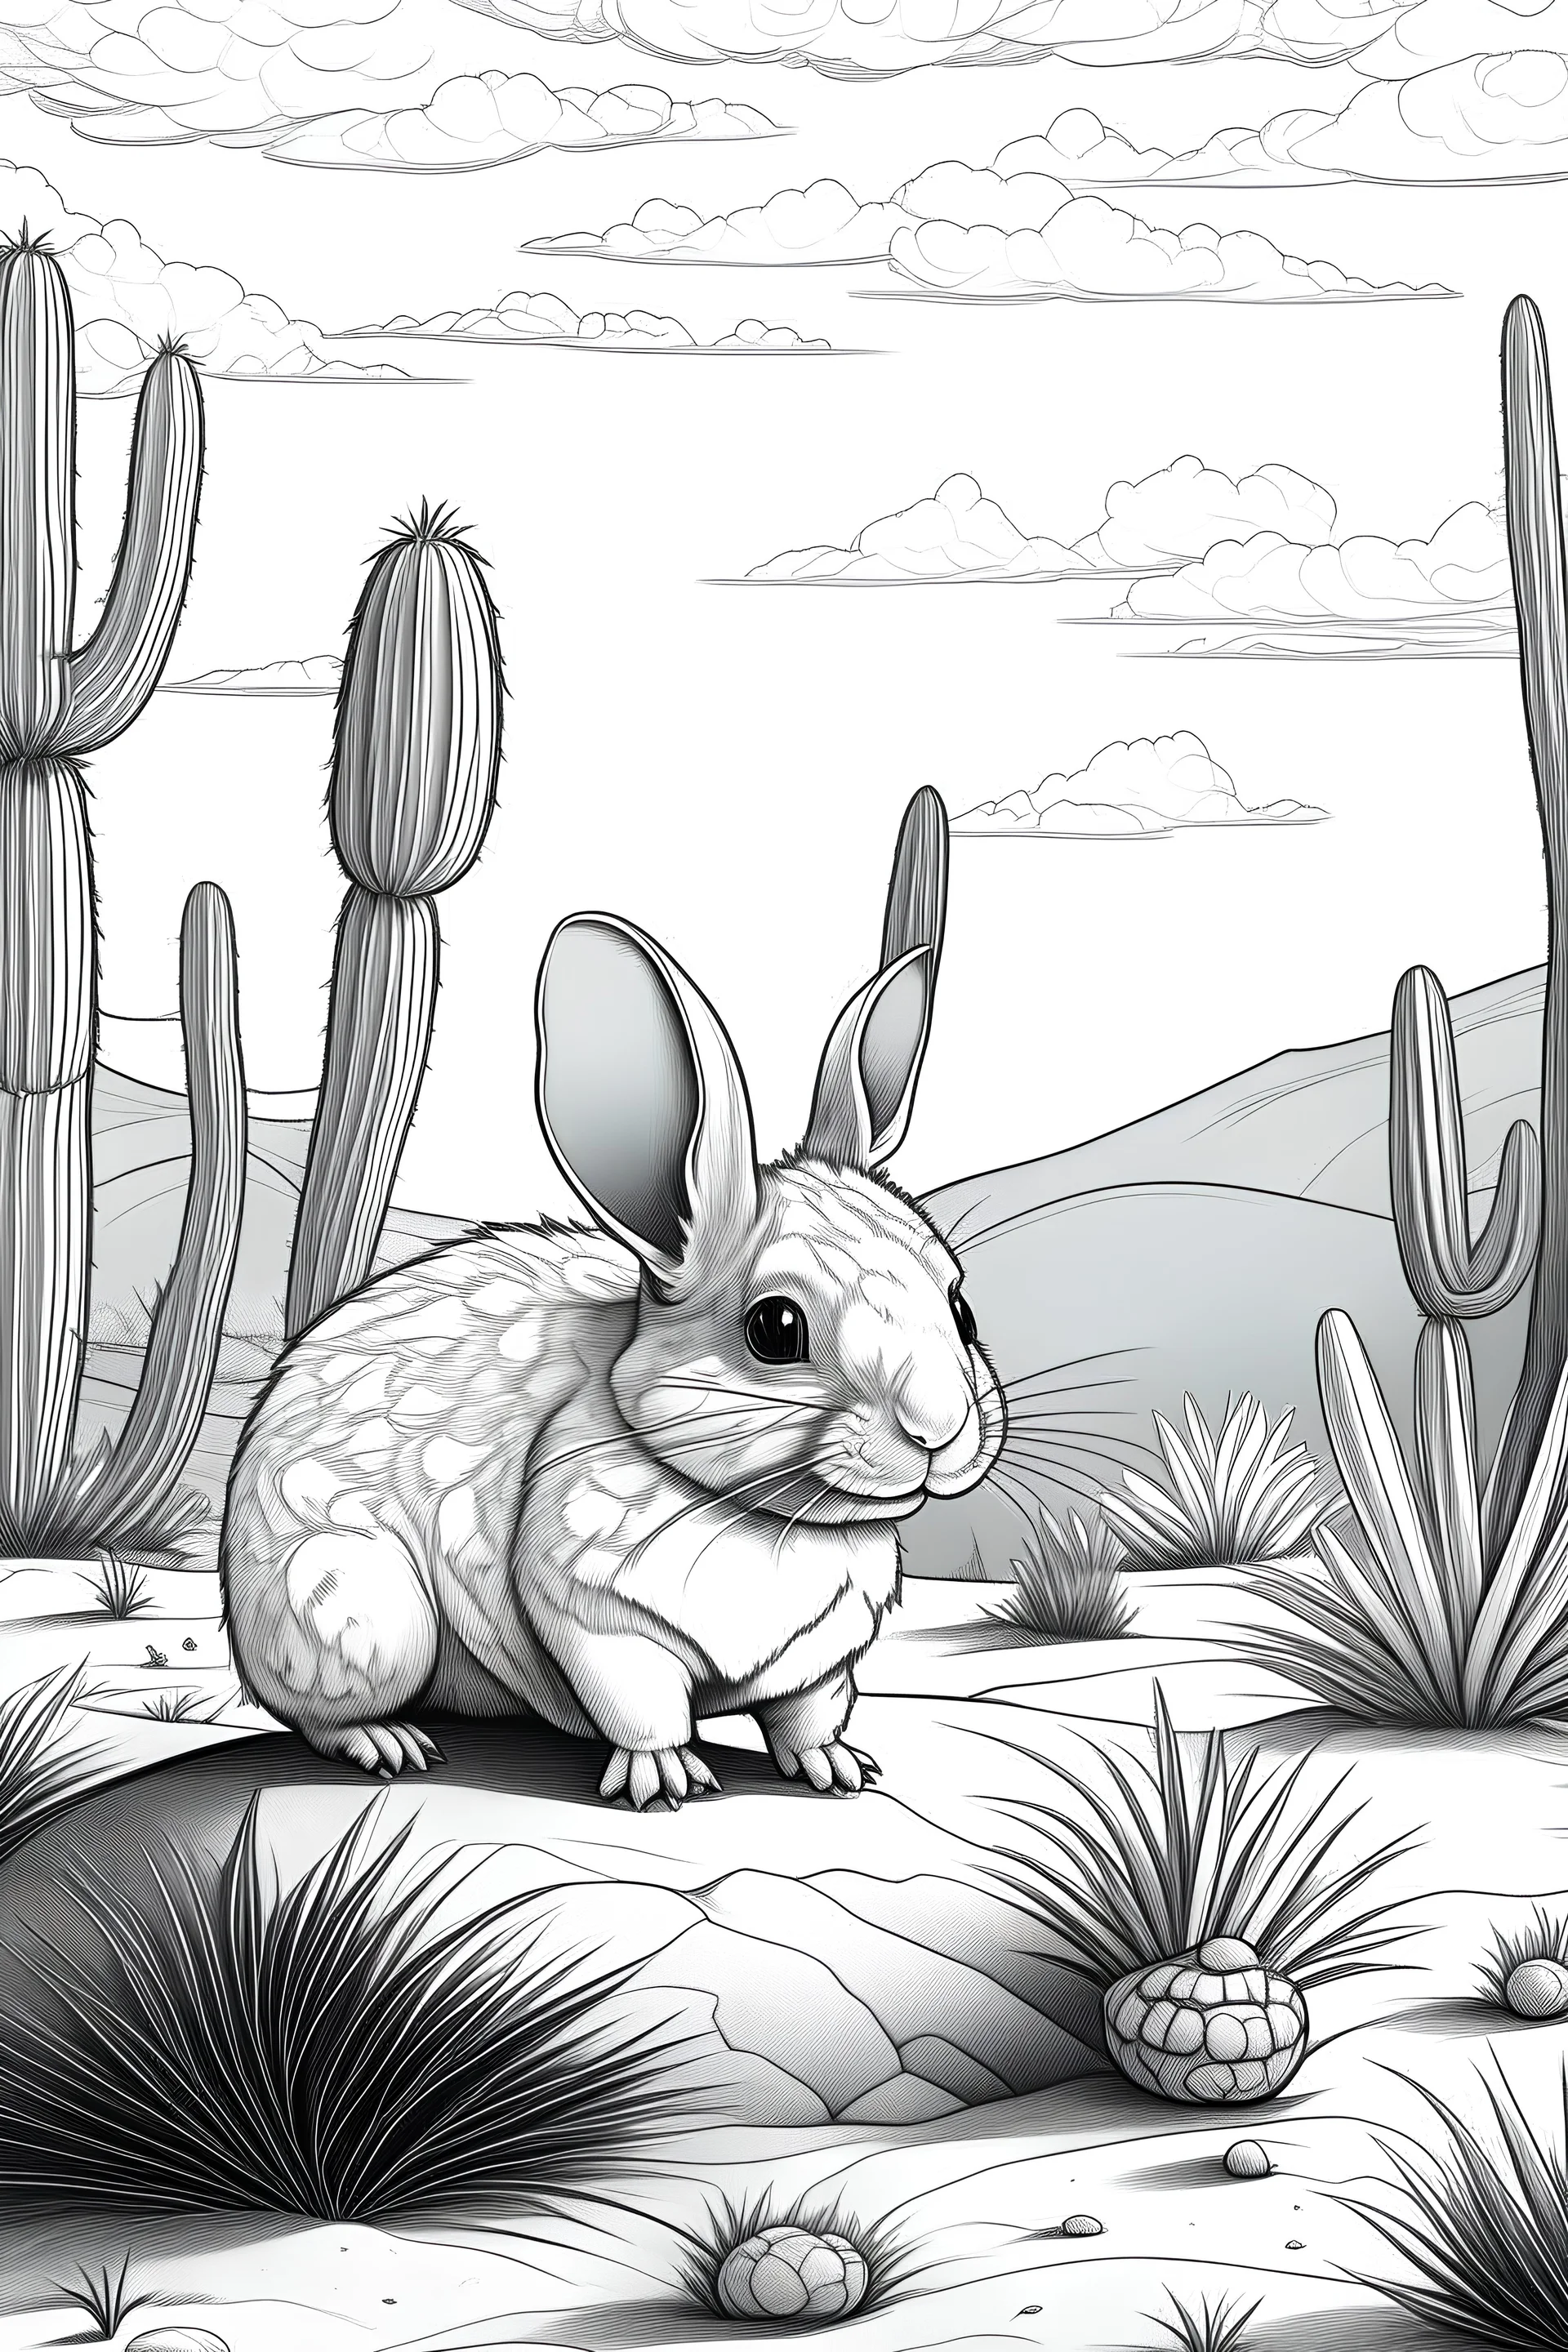 Lexica - A realistic drawing of a chinchilla